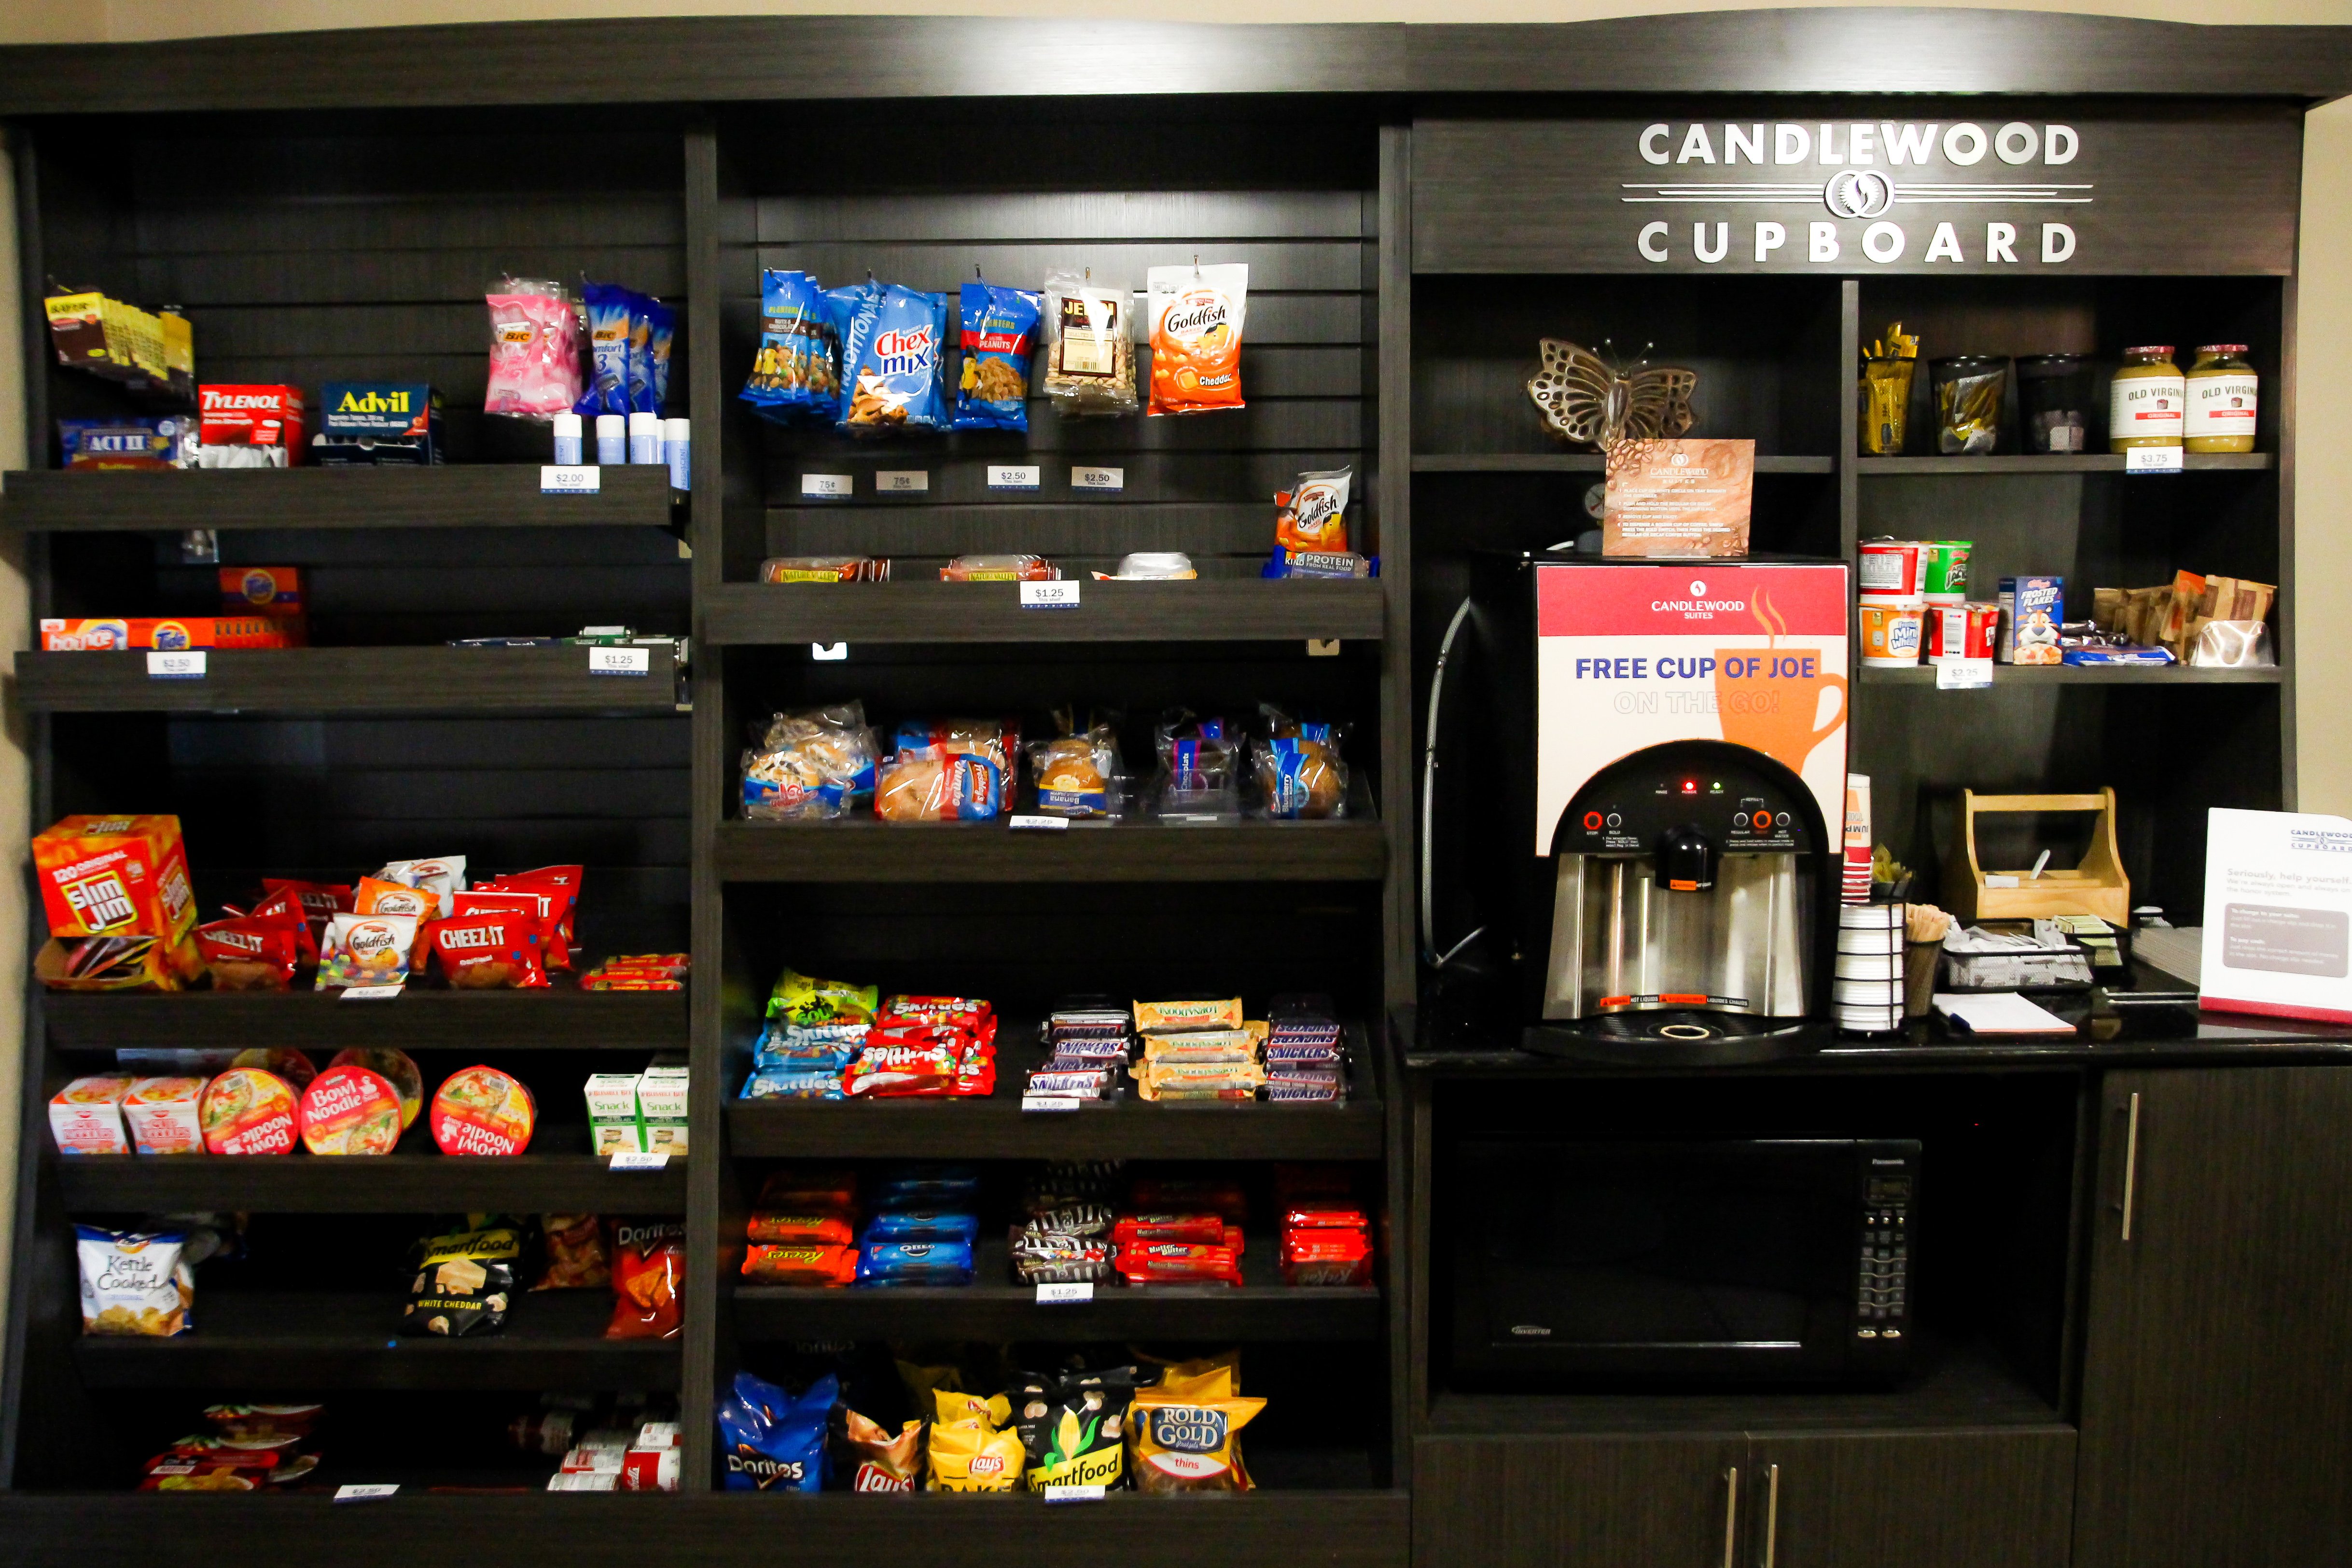 Candlewood Cupboard free coffee, snacks & beverages for purchase